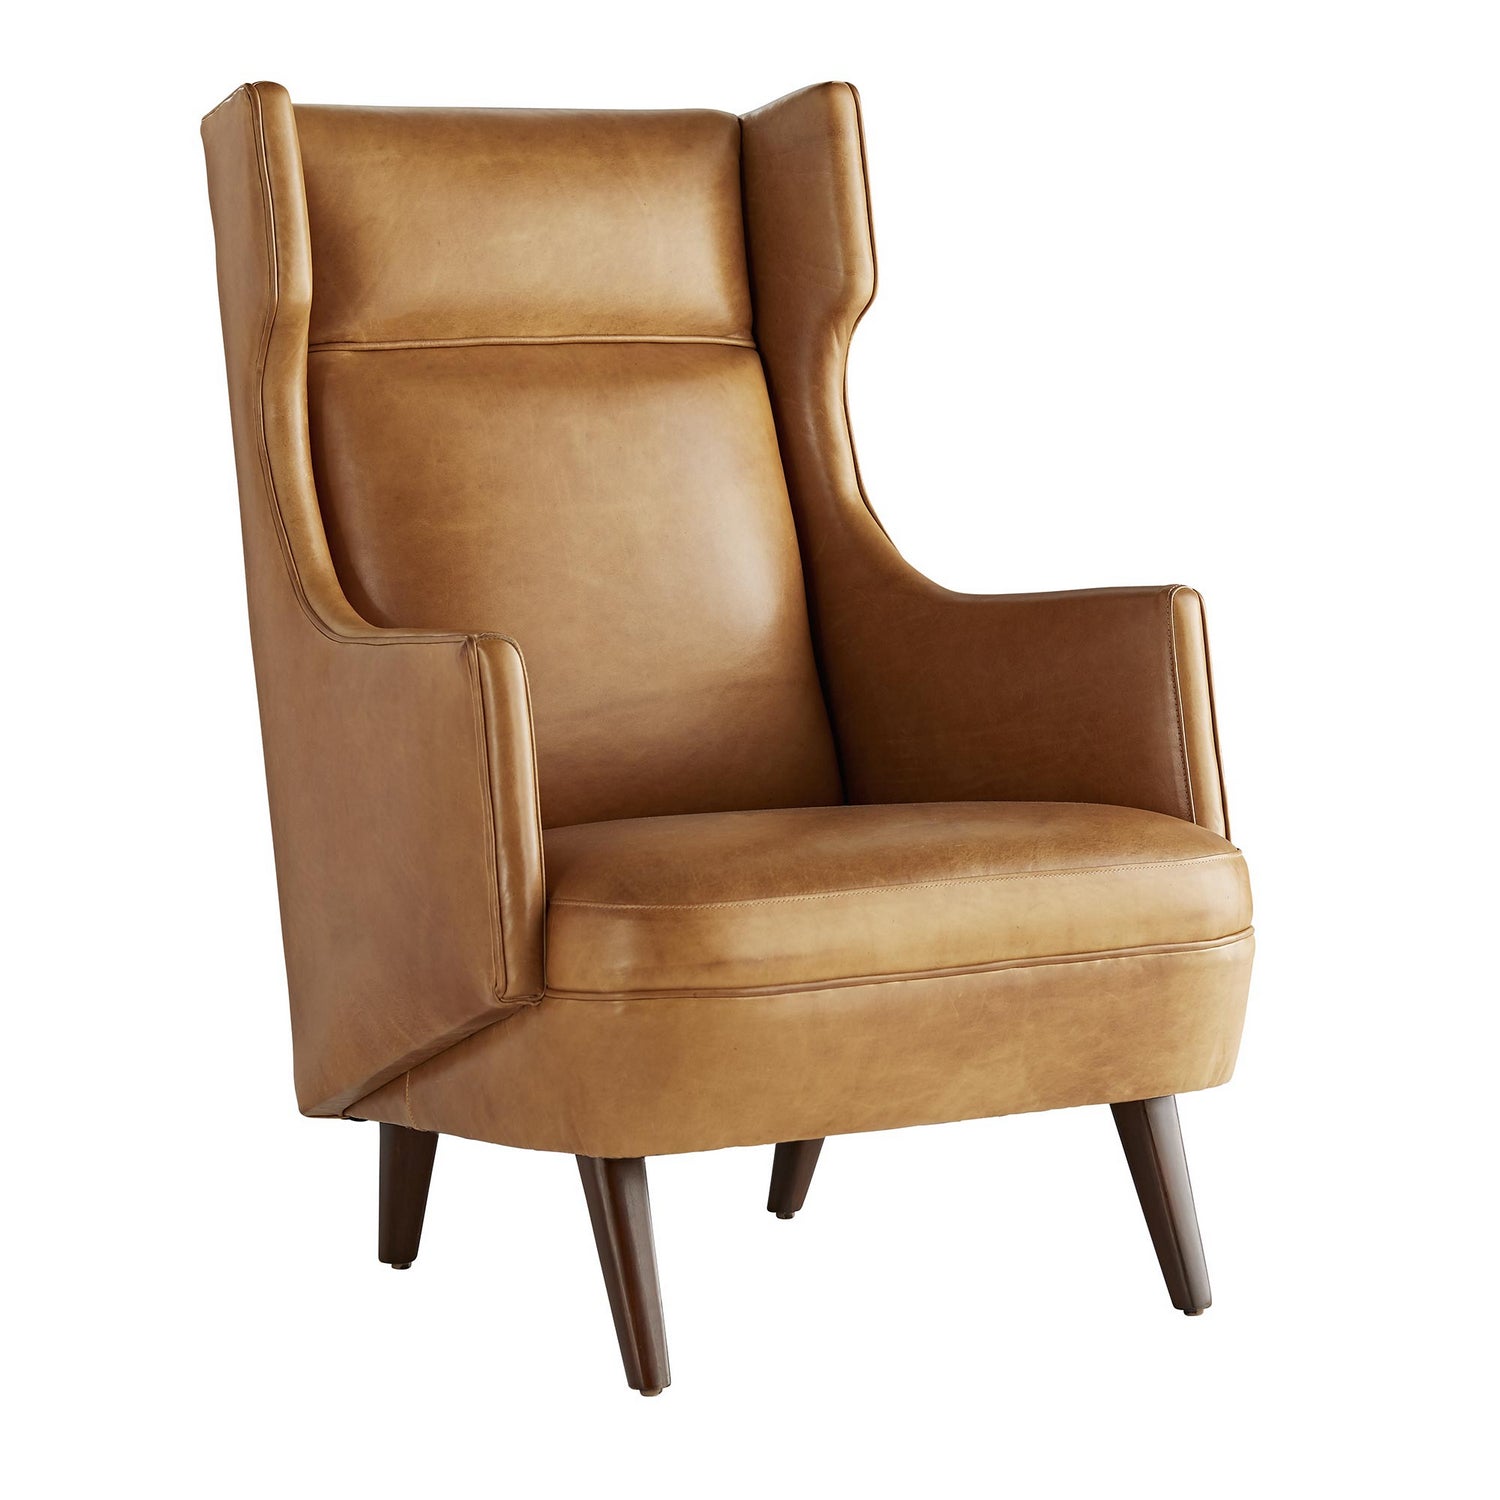 Chair from the Budelli collection in Cognac finish